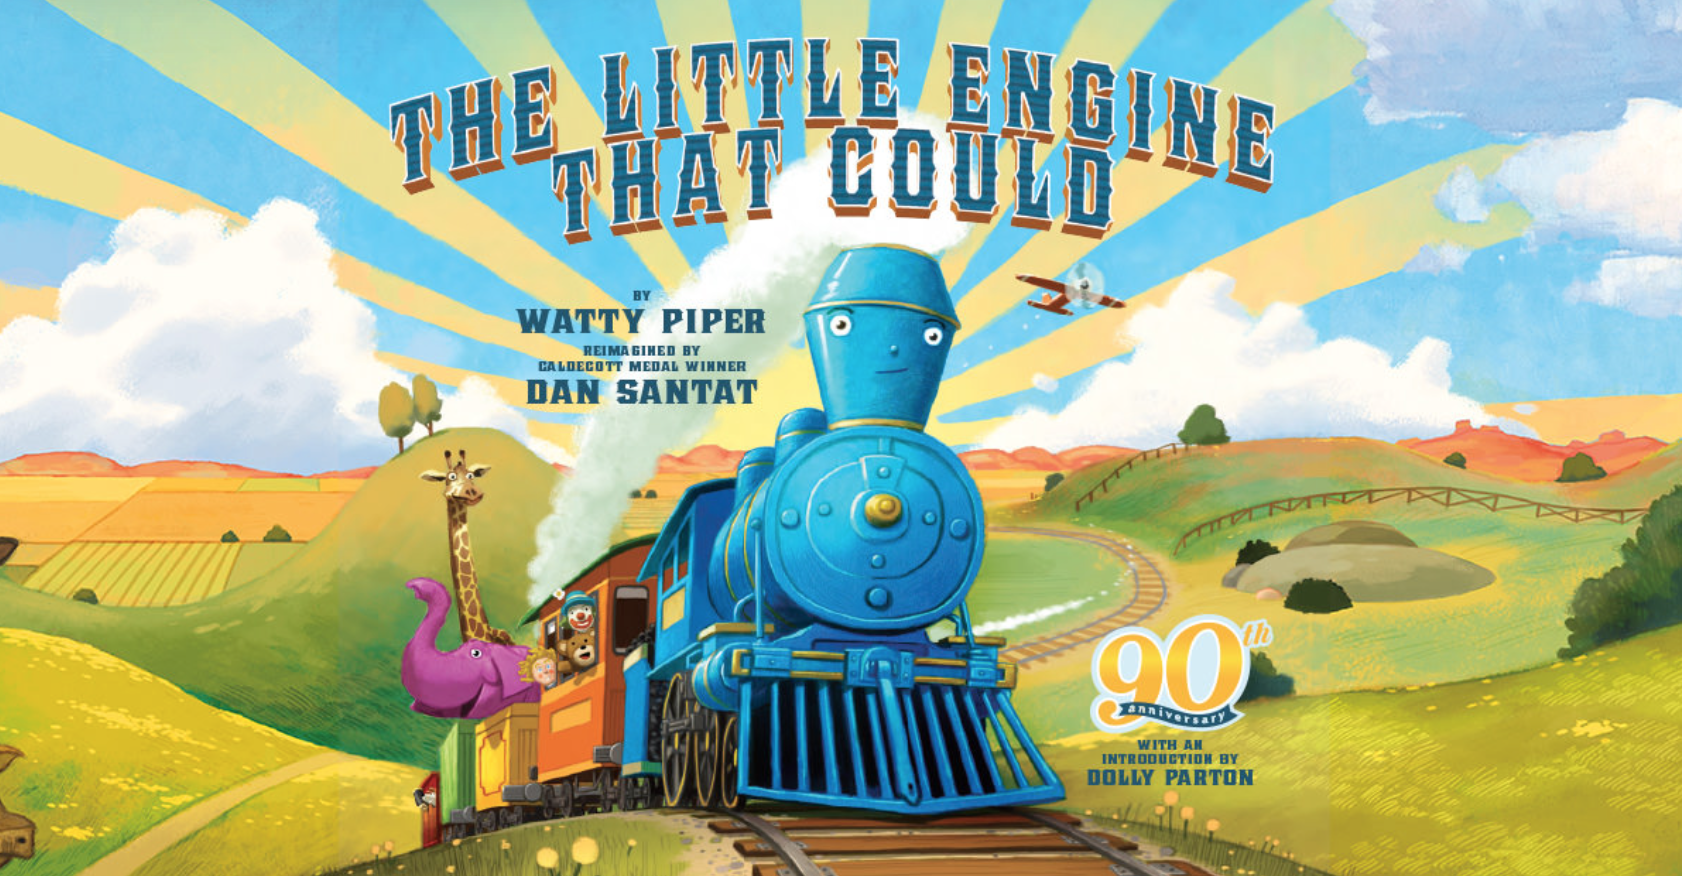 Cover image for The Little Engine That Could with an illustration of a blue engine with a sweet face on her stovepipe at the head of a colorful train filled with toys and animals. Behind the train is a beautiful landscape.